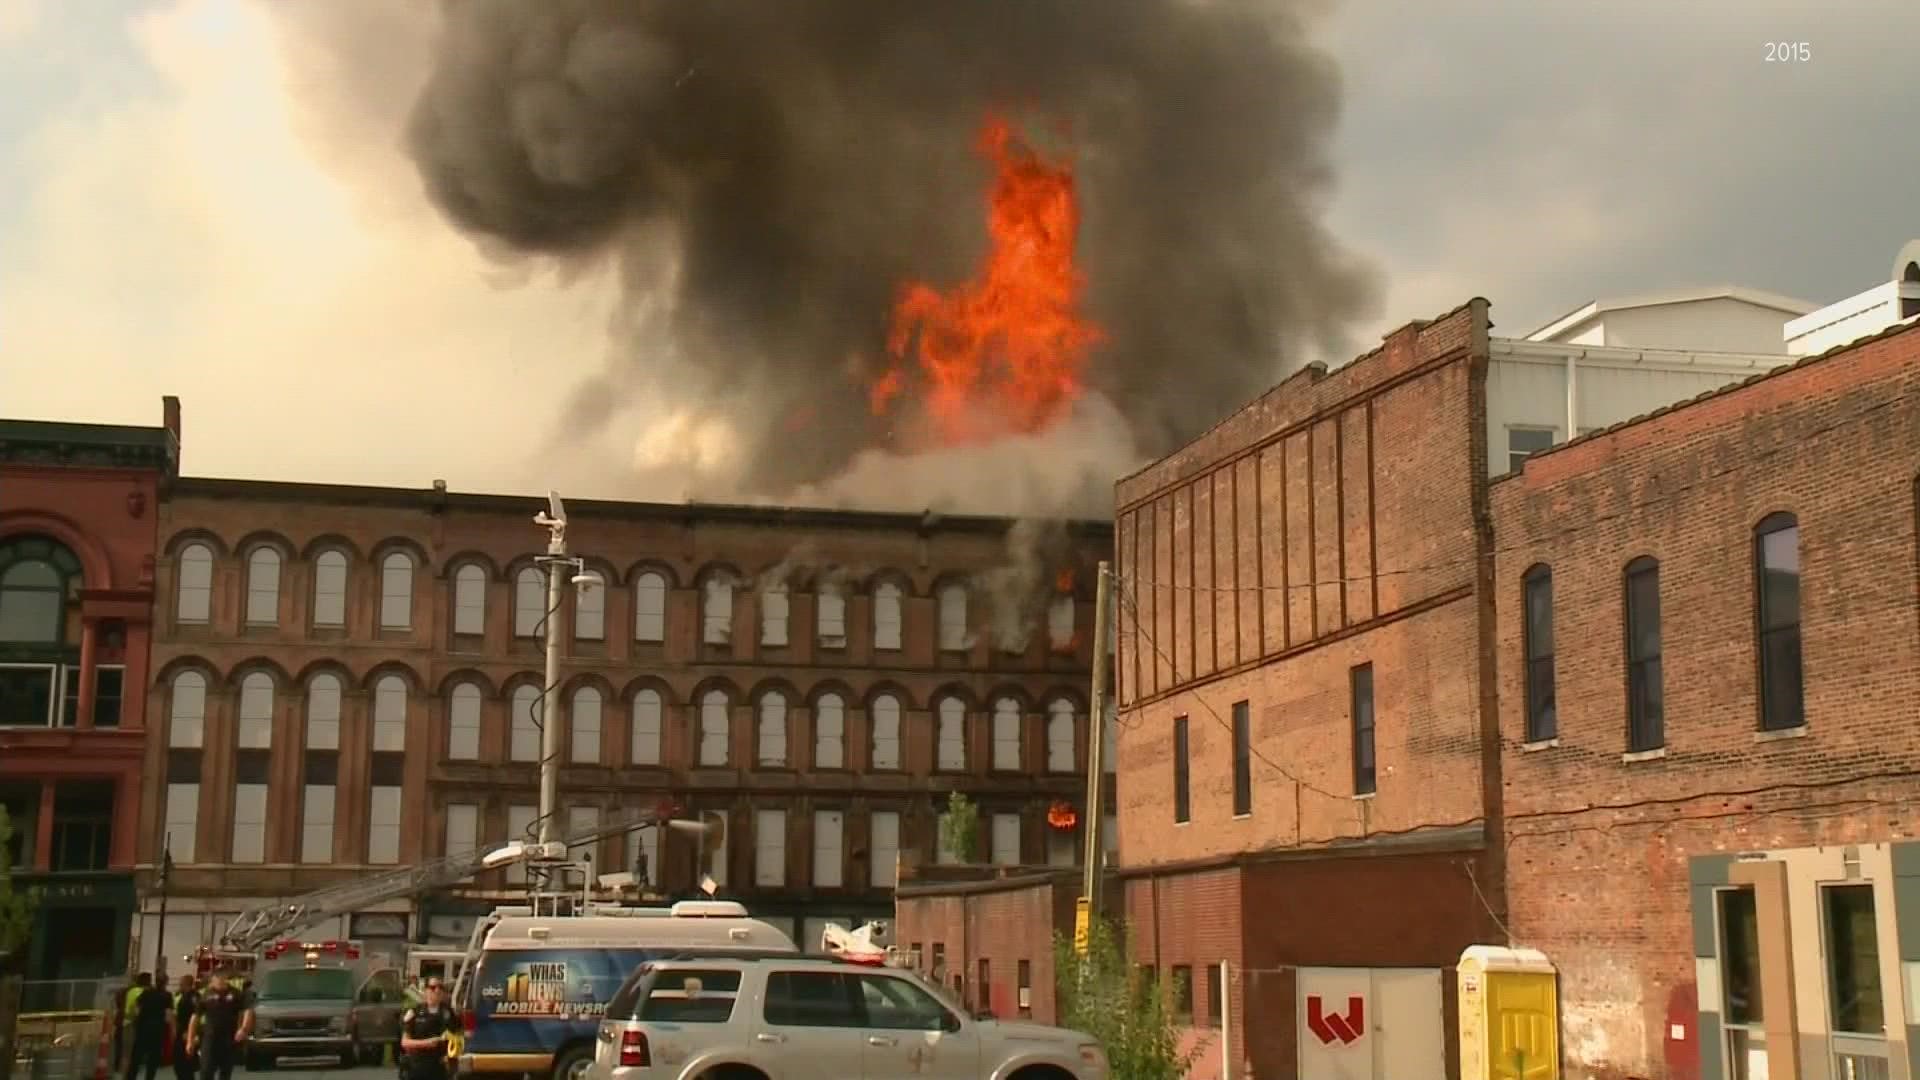 Main Street Revitalization sued contractor Sullivan and Cozart after a 2015 fire destroyed three historic buildings.